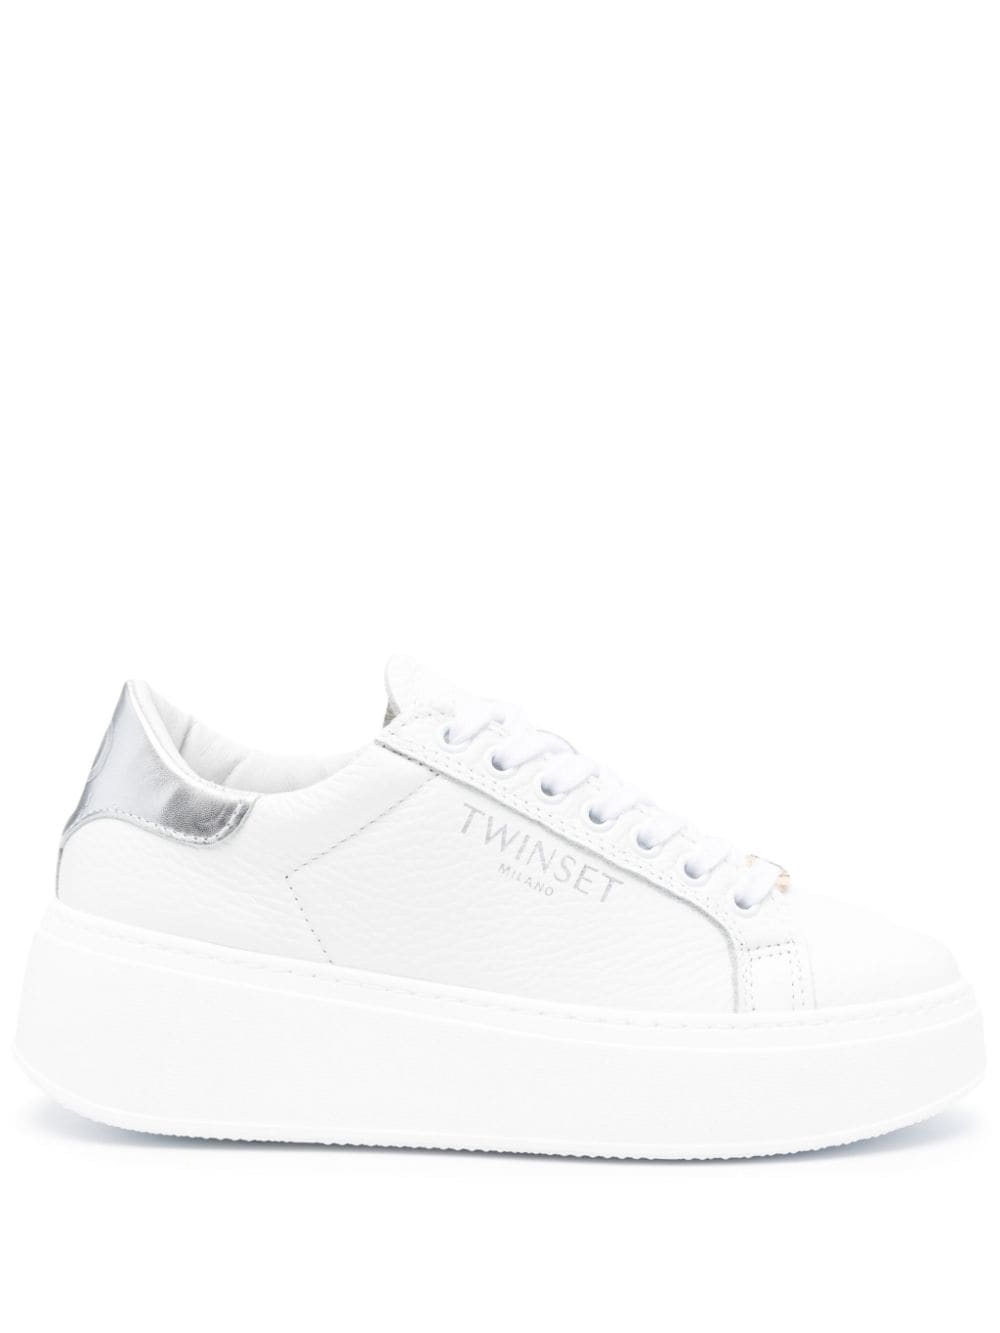 TWINSET platform leather sneakers - Bianco